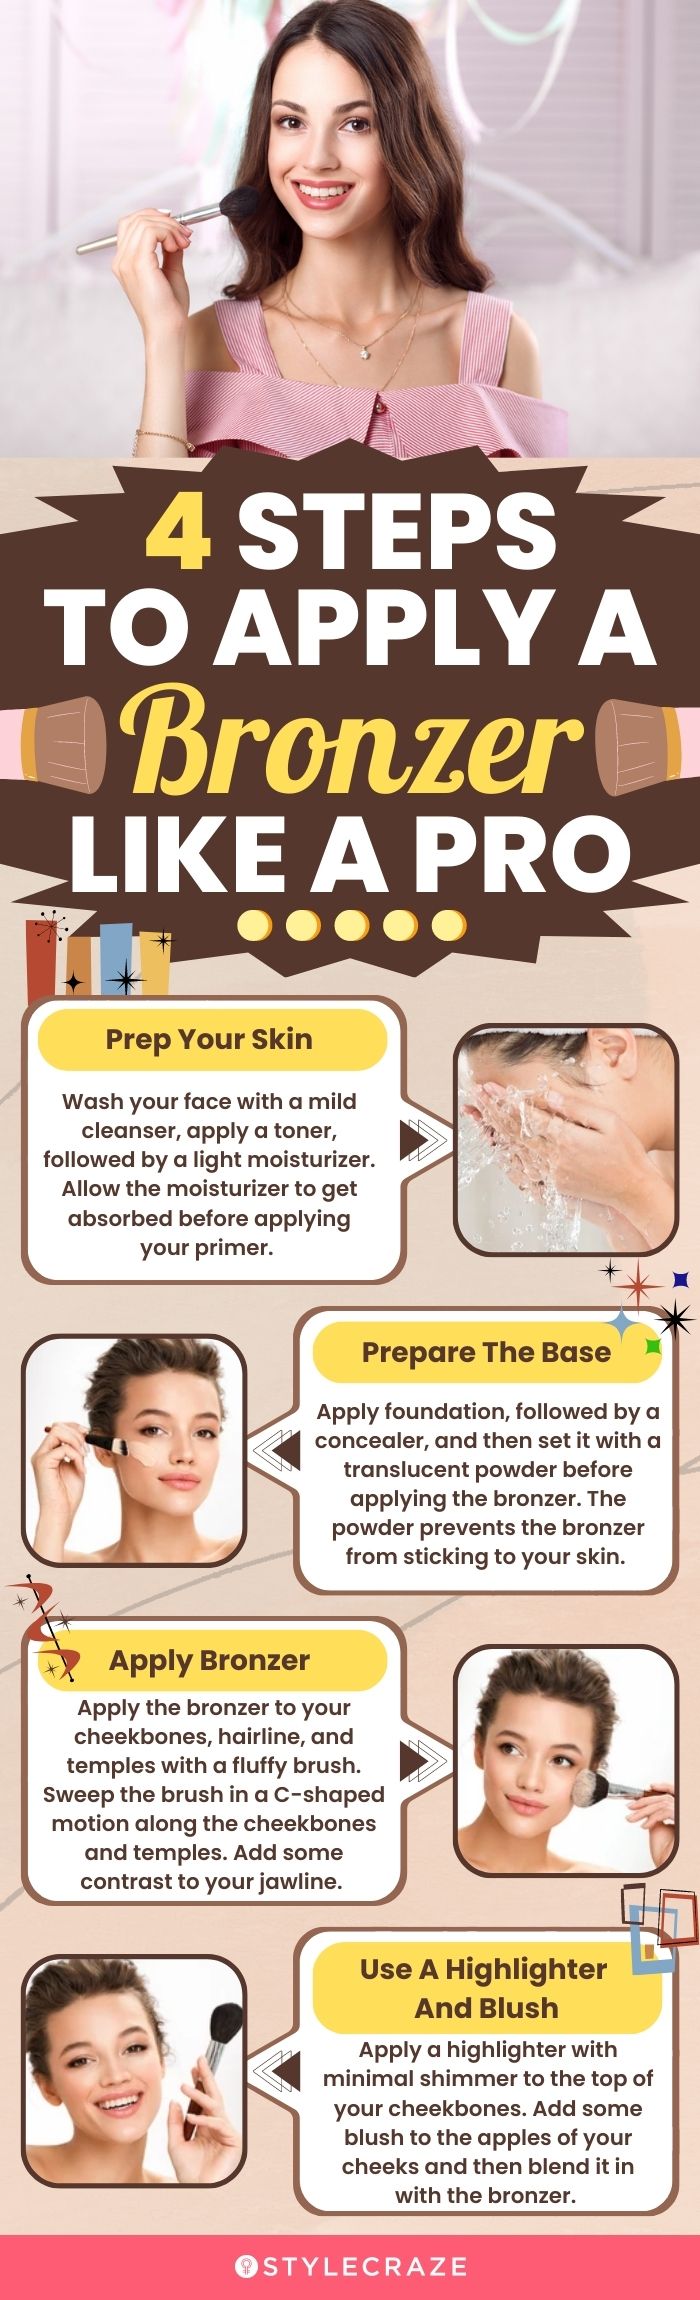 4 steps to apply a bronzer like a pro (infographic)